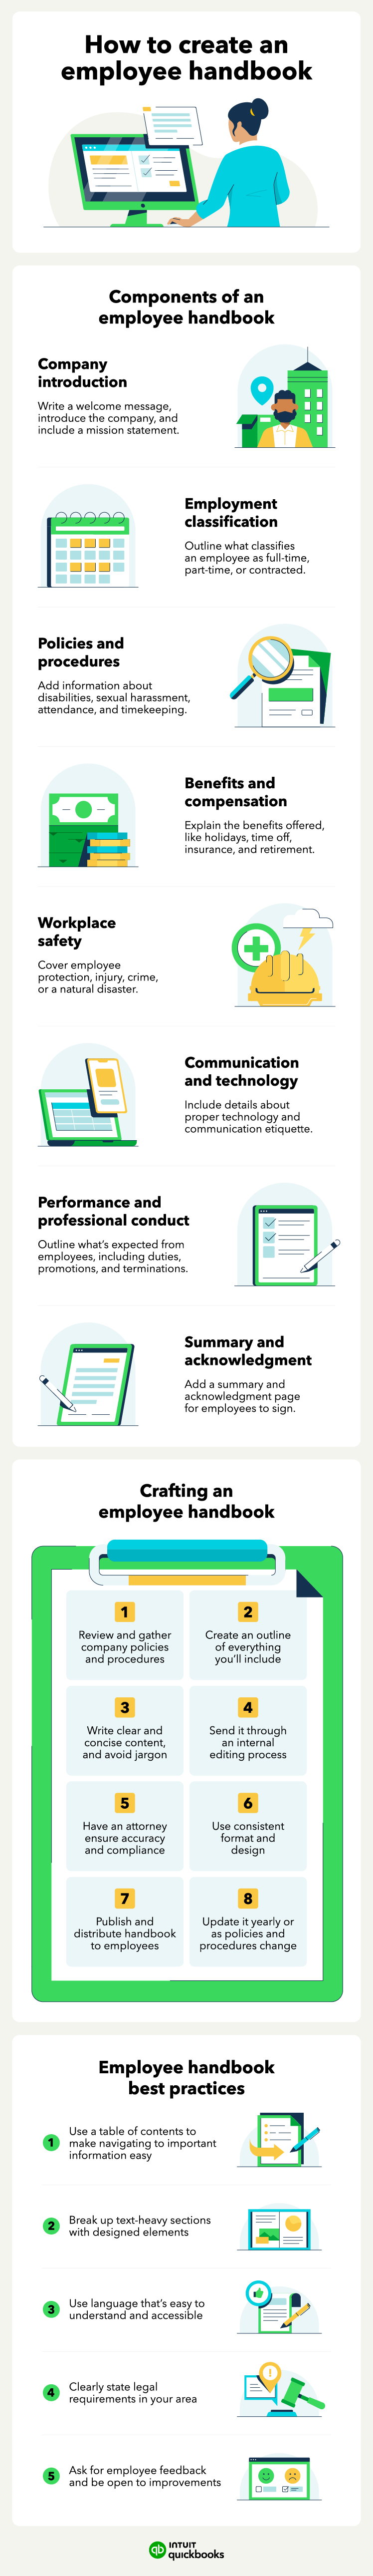  An infographic overviewing the sections of an employee handbook, tips, and how to create it.